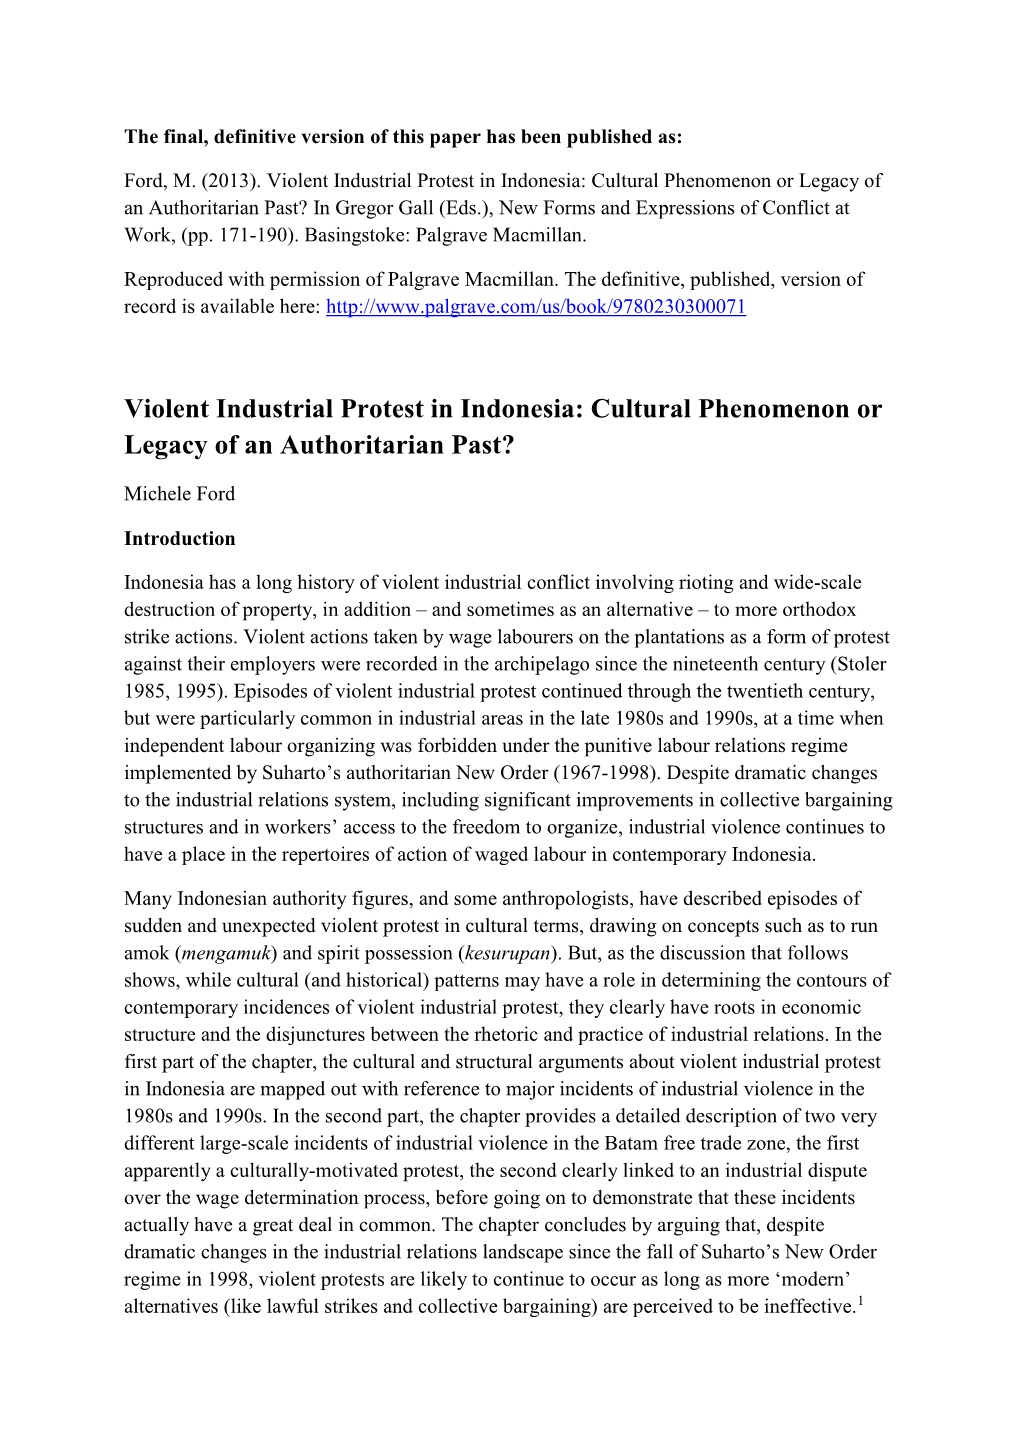 Violent Industrial Protest in Indonesia: Cultural Phenomenon Or Legacy Of